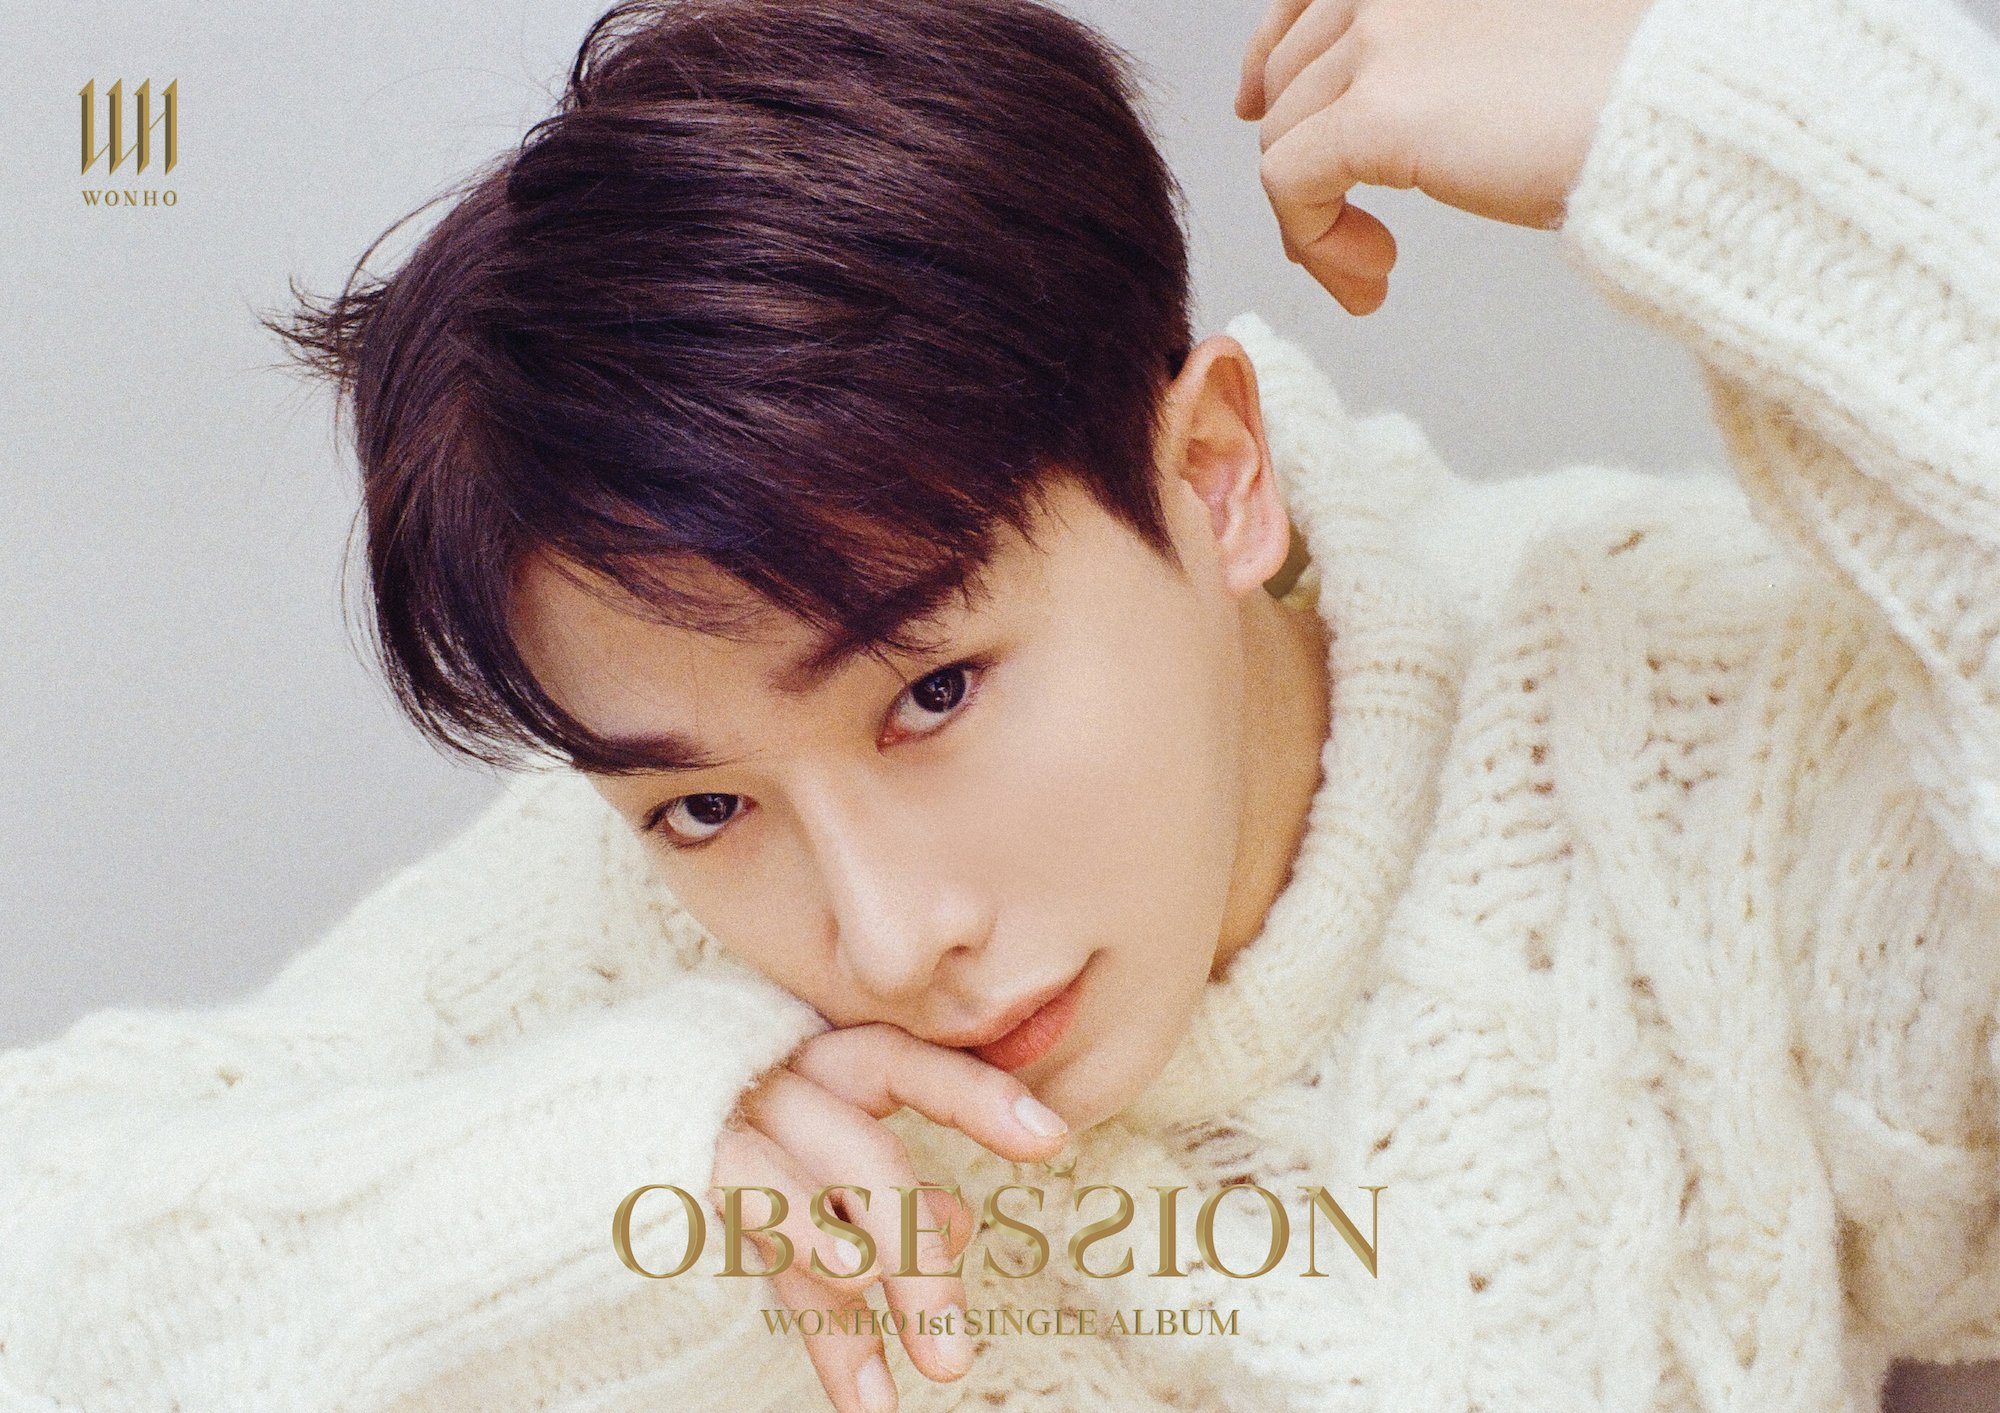 Wonho wears a white sweater in a promotional photo for 'Obsession'